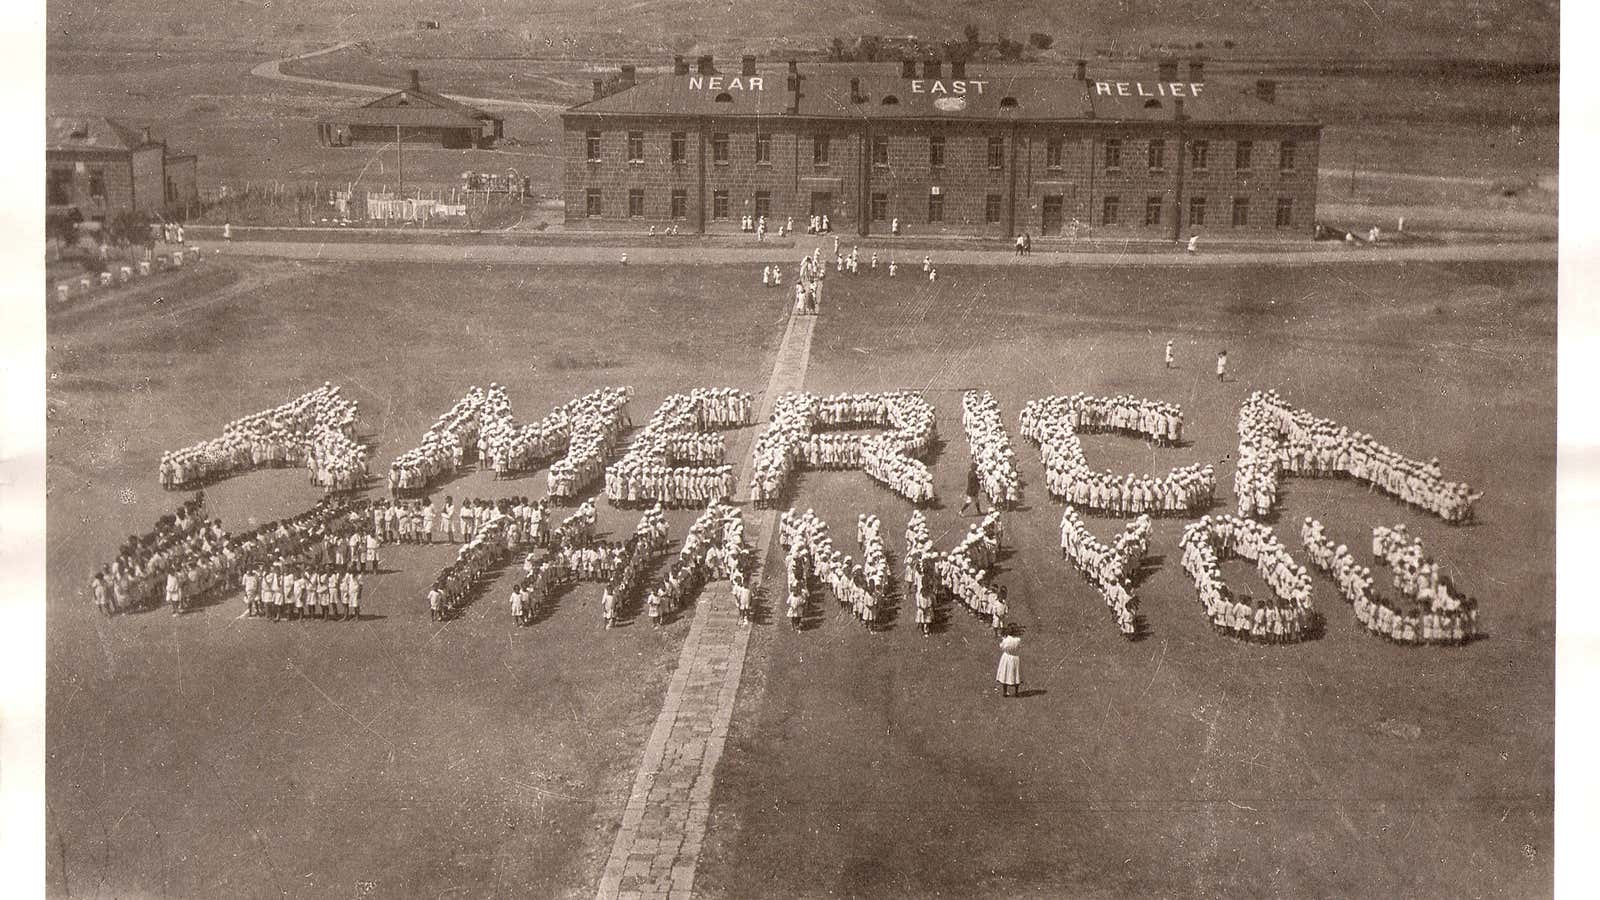 Orphans at Near East Relief Alexandrapol (today’s Gyumri, Armenia) spell out “America We Thank You.”